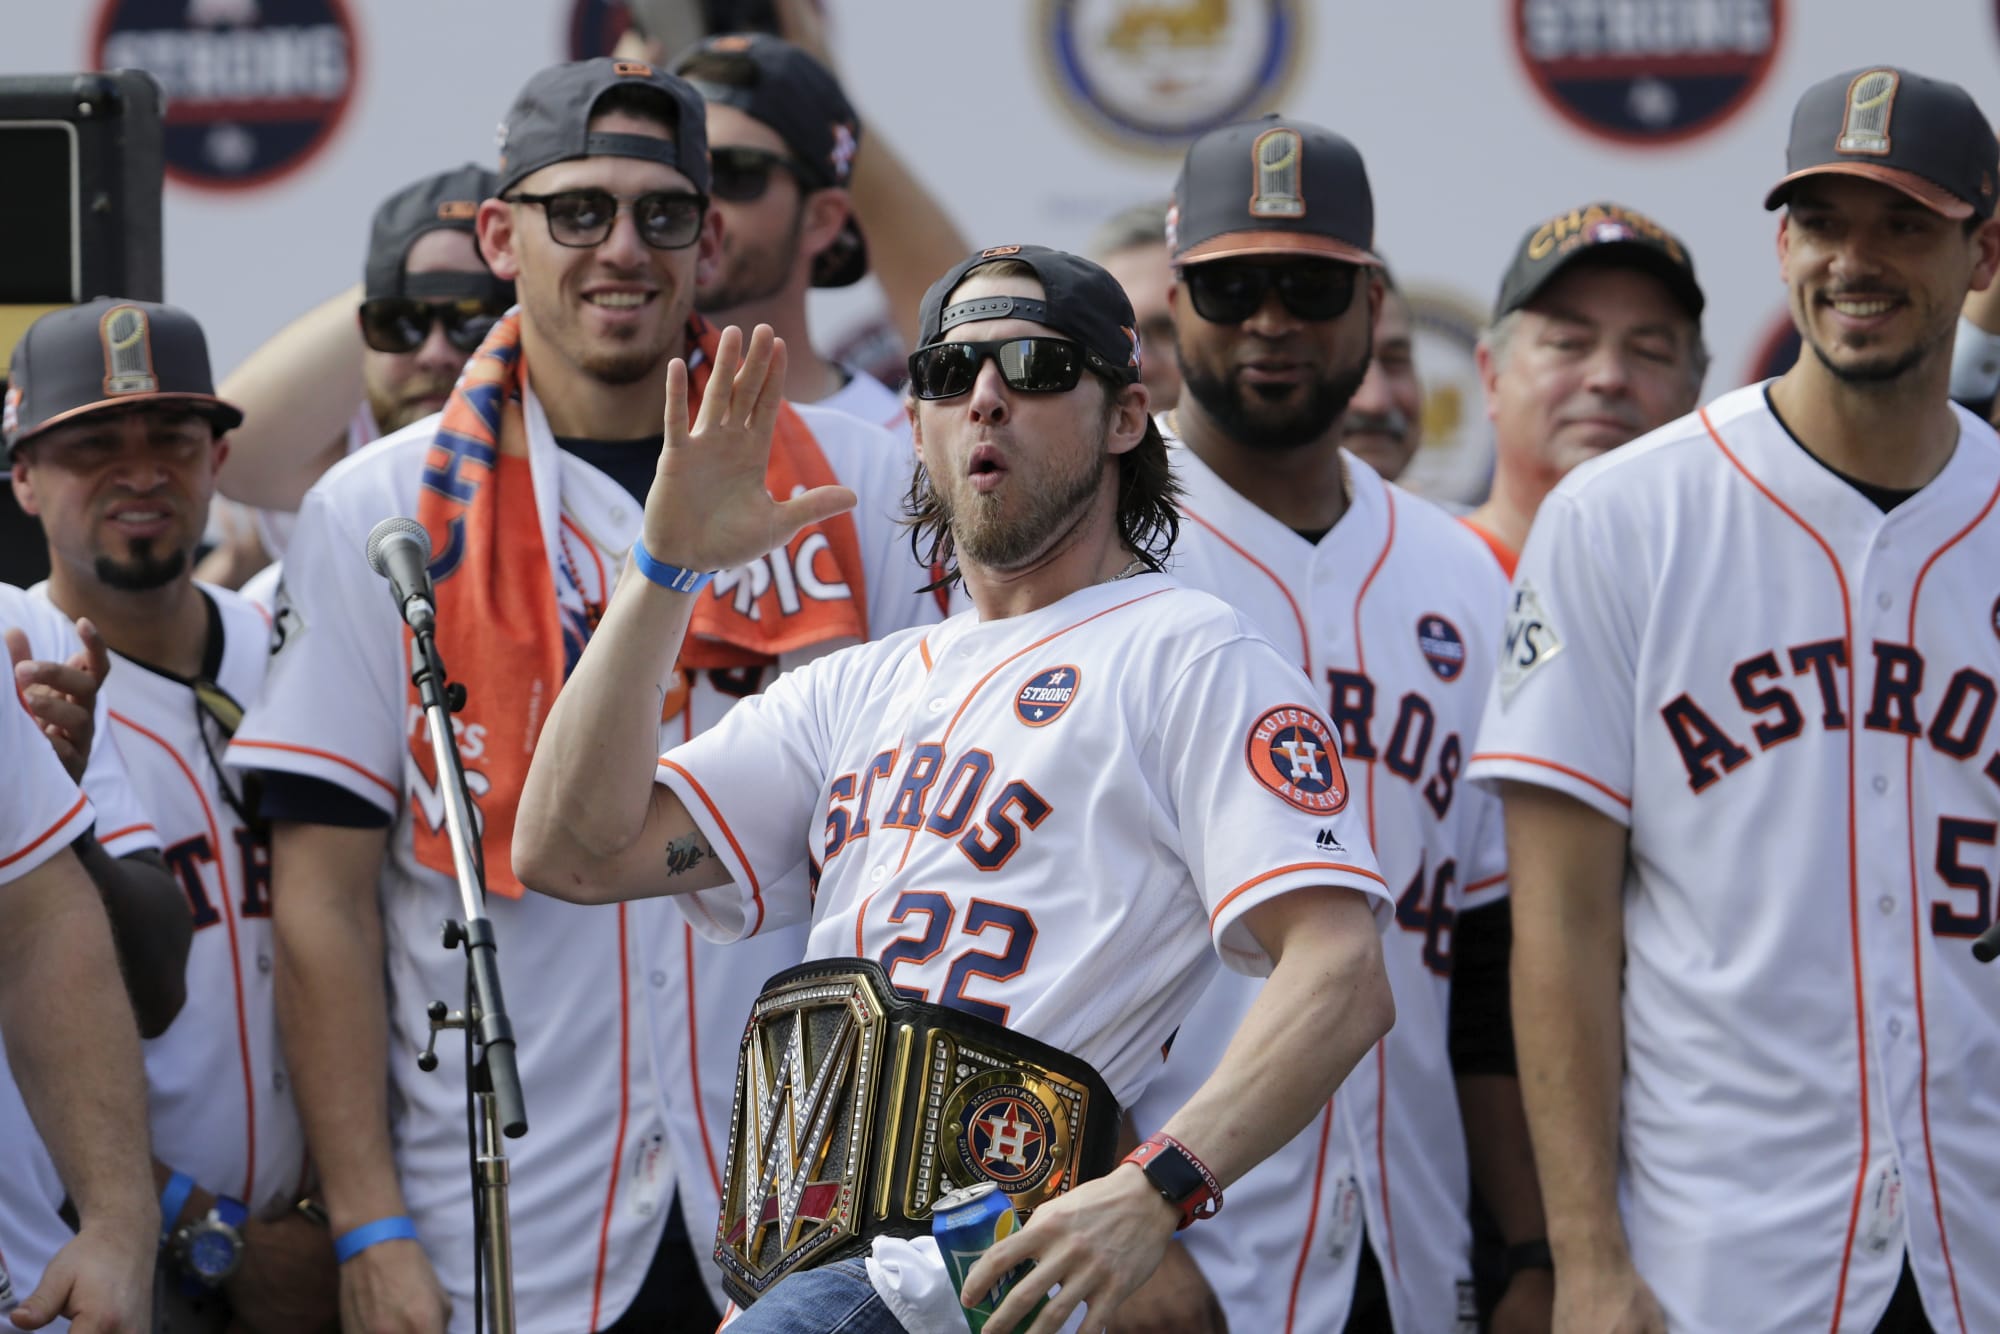 Houston Astros: Why the asterisk argument for titles remains